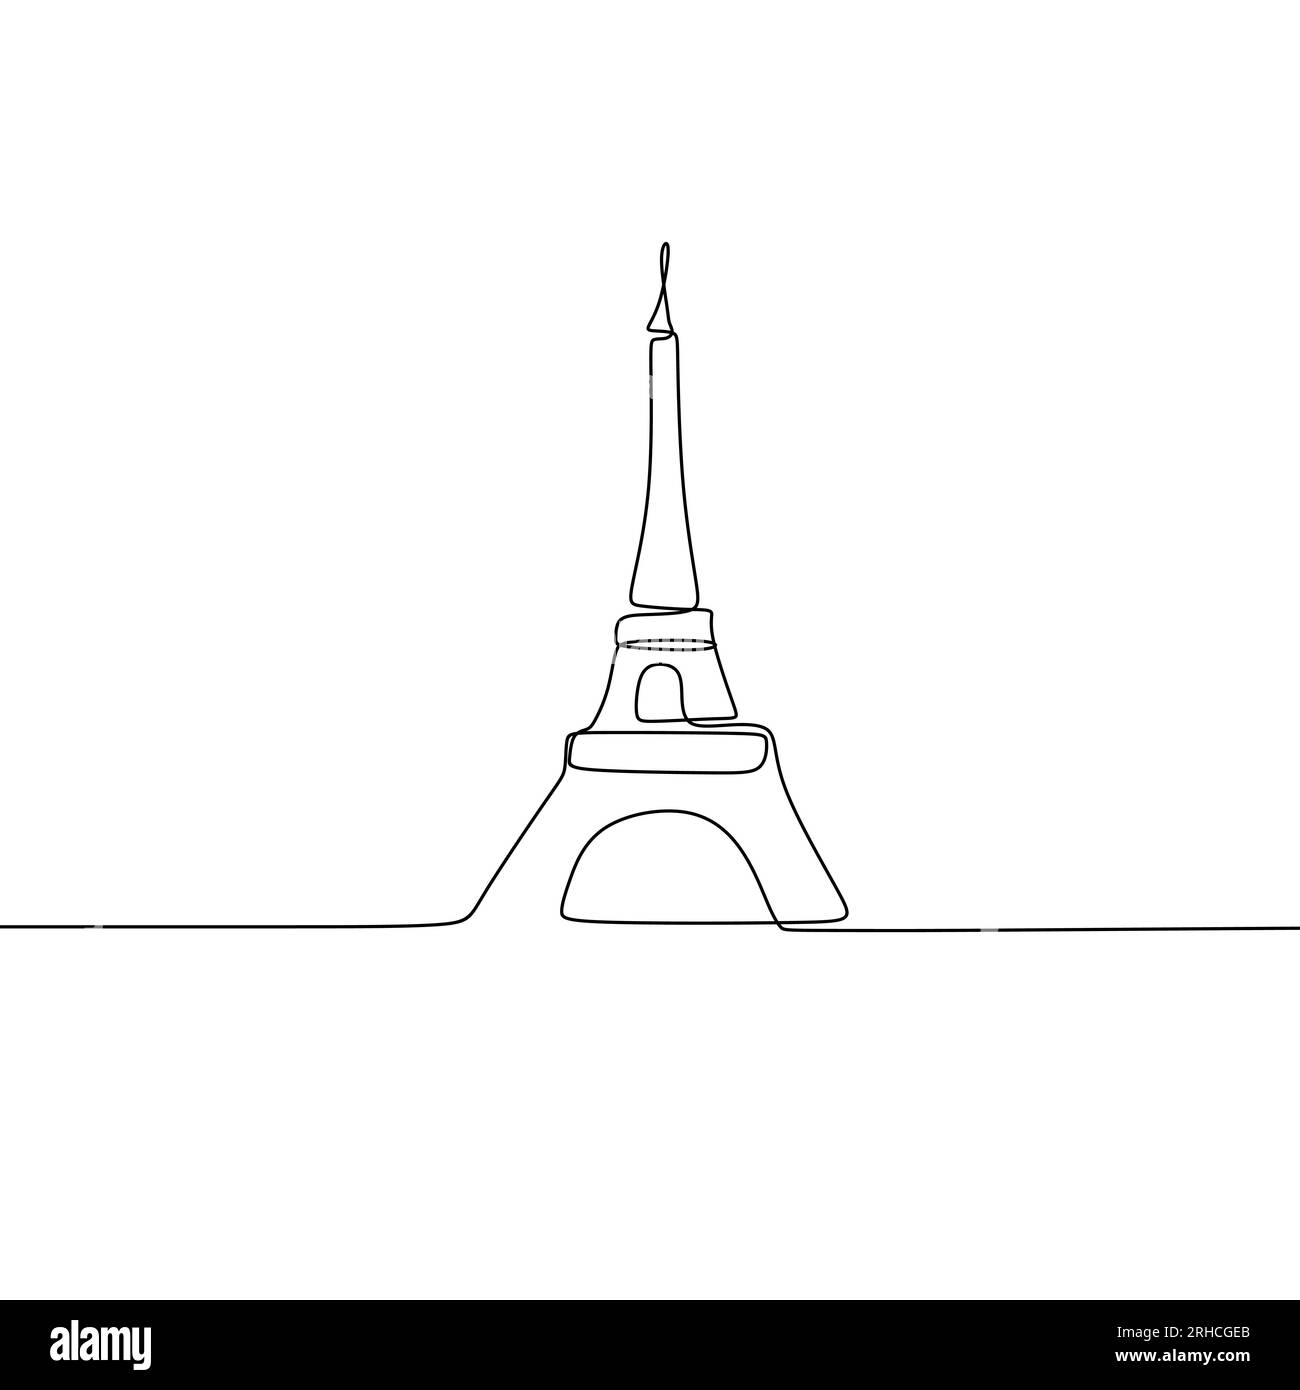 Paris eiffel tower icon vector illustration with continuous line drawing minimalism style Stock Vector